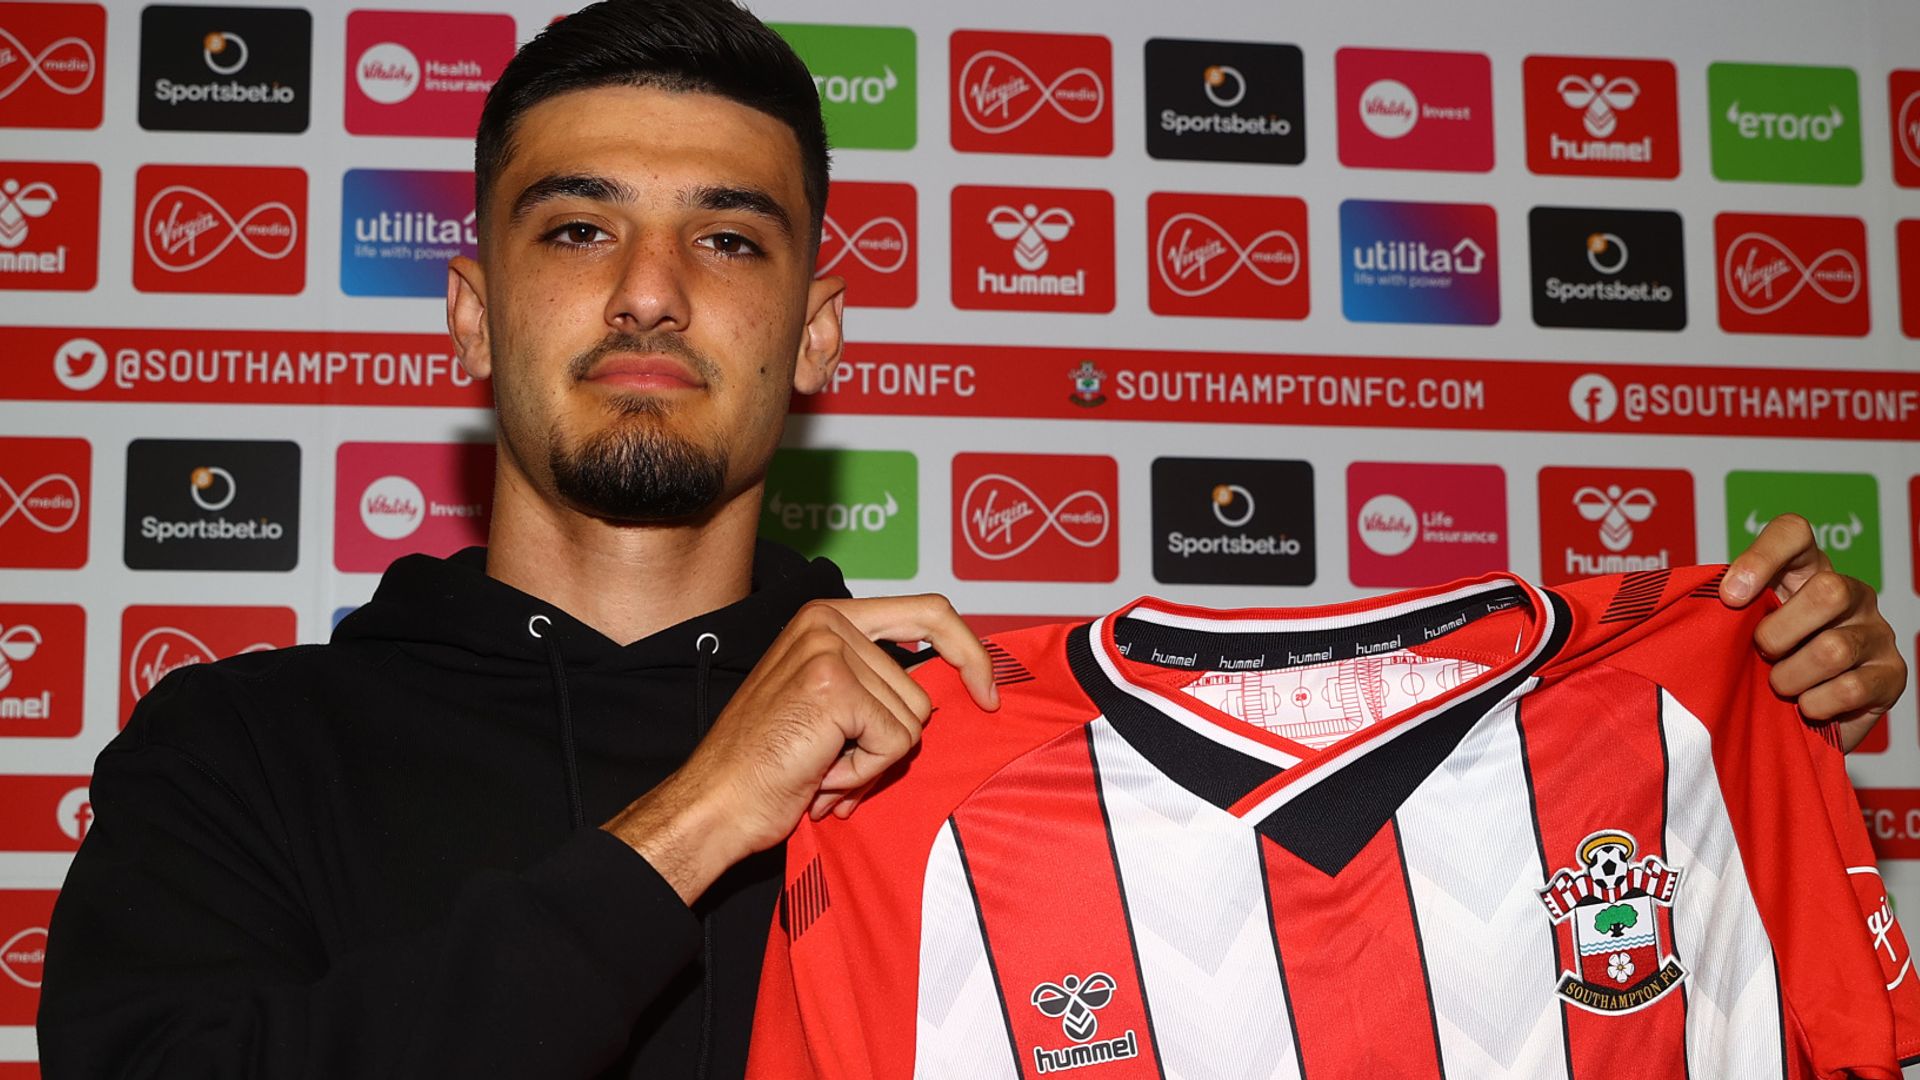 Chelsea youngster Broja joins Southampton on loan